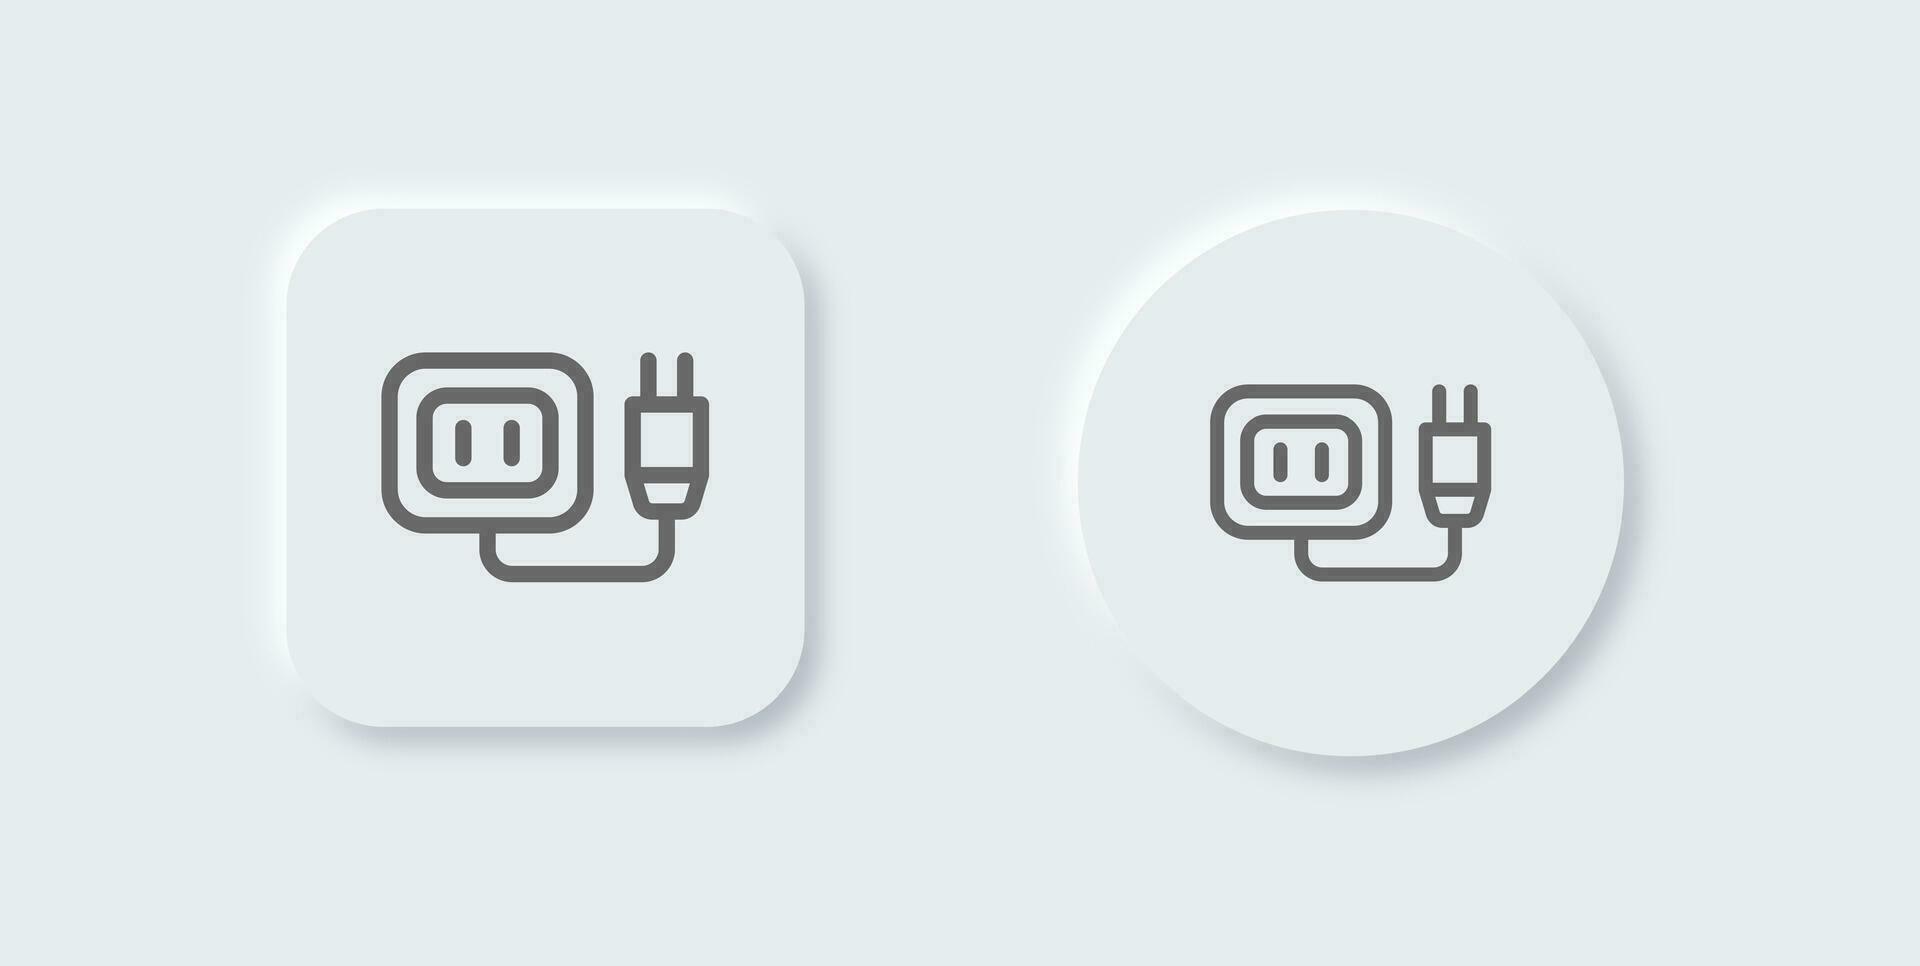 Socket line icon in neomorphic design style. Power plug signs vector illustration.